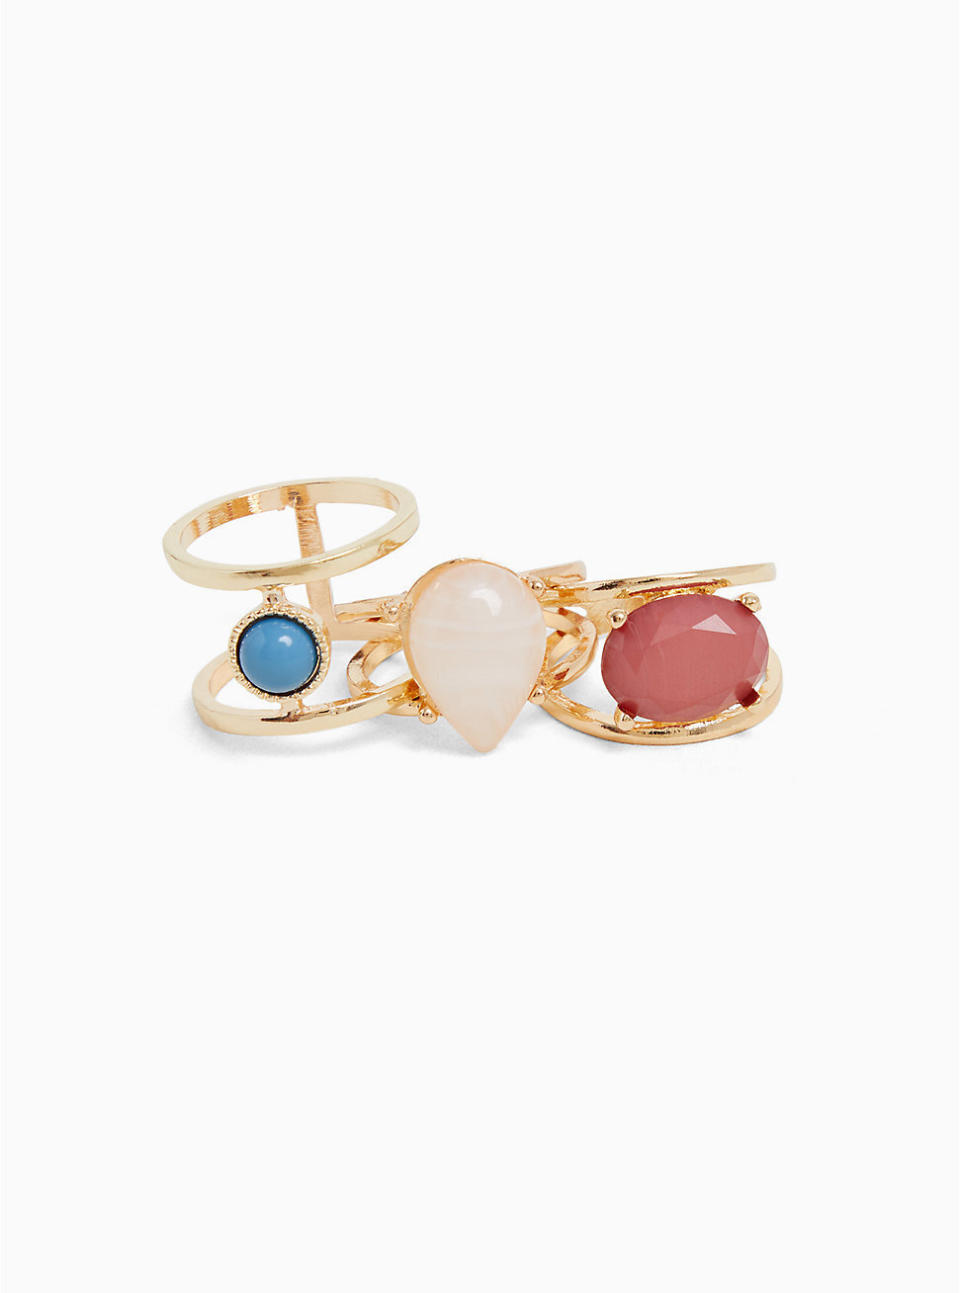 Get the <a href="https://www.torrid.com/product/multi-stone-ring---set-of-3/11921523.html?cgid=ShoesAccessories_Jewelry_Rings#start=17" target="_blank" rel="noopener noreferrer">Torrid multi stone ring 3-pack, available in sizes 9-12, for $14.90</a>